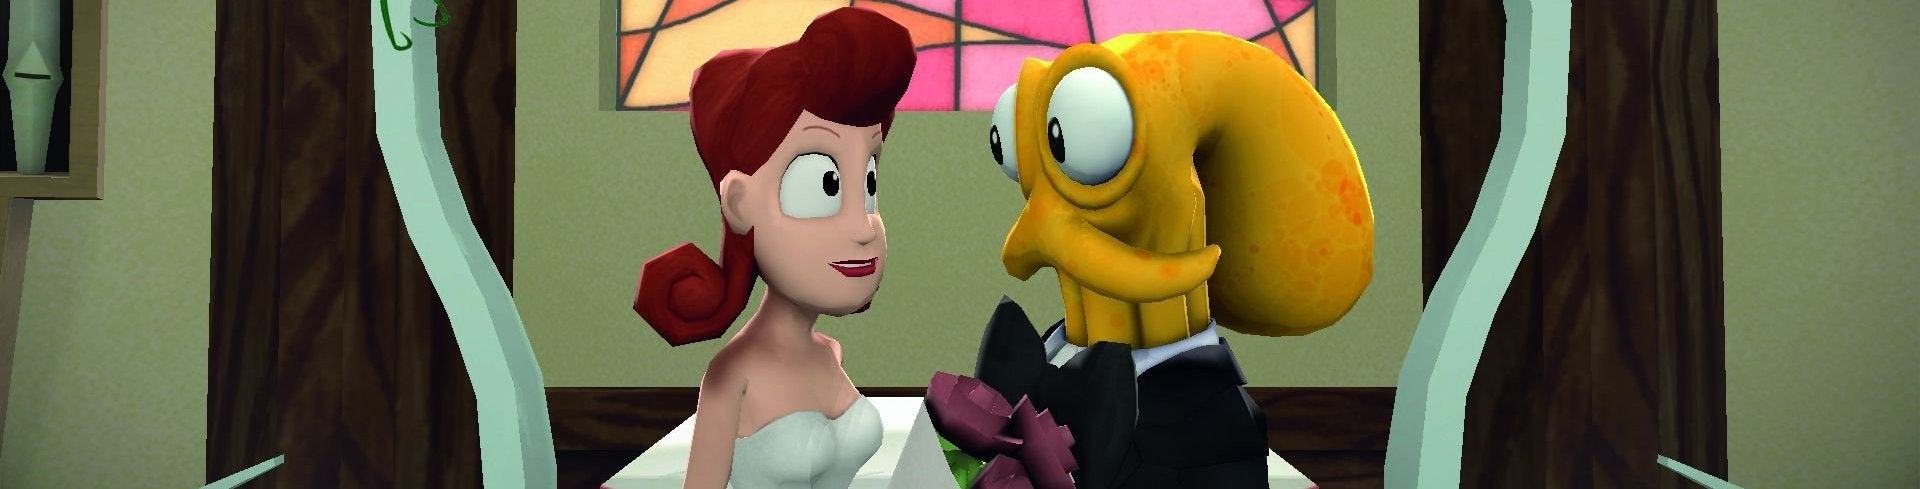 Immagine di Octodad: Dadliest Catch PS4 - review